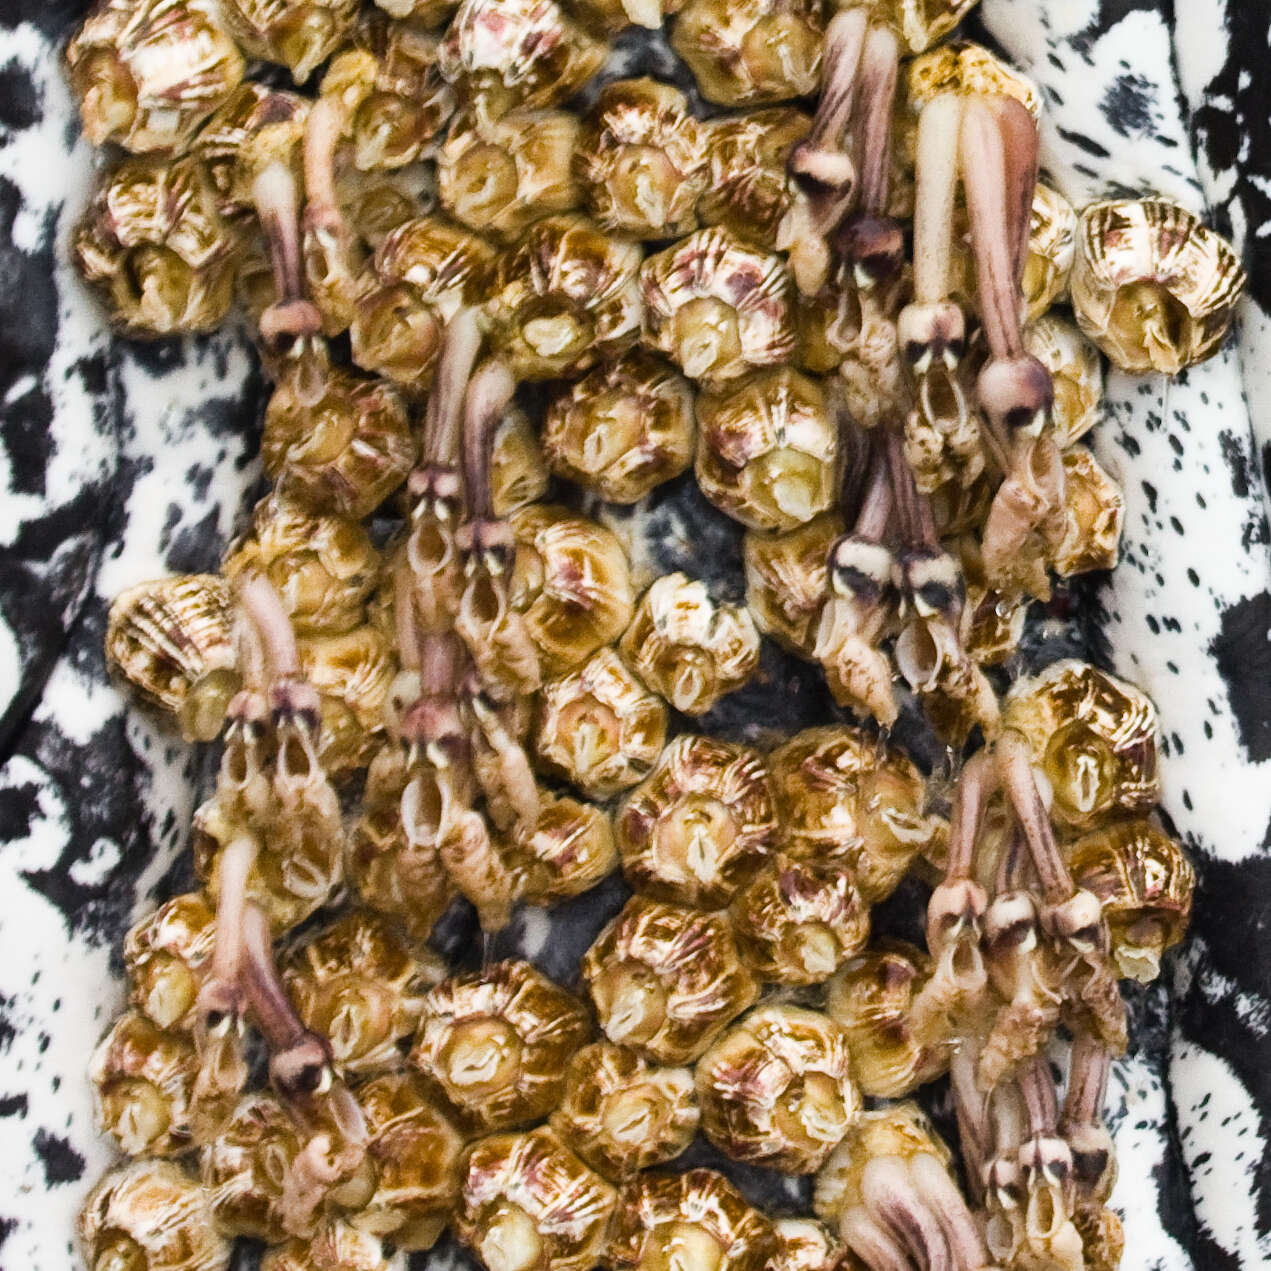 Image of whale barnacles